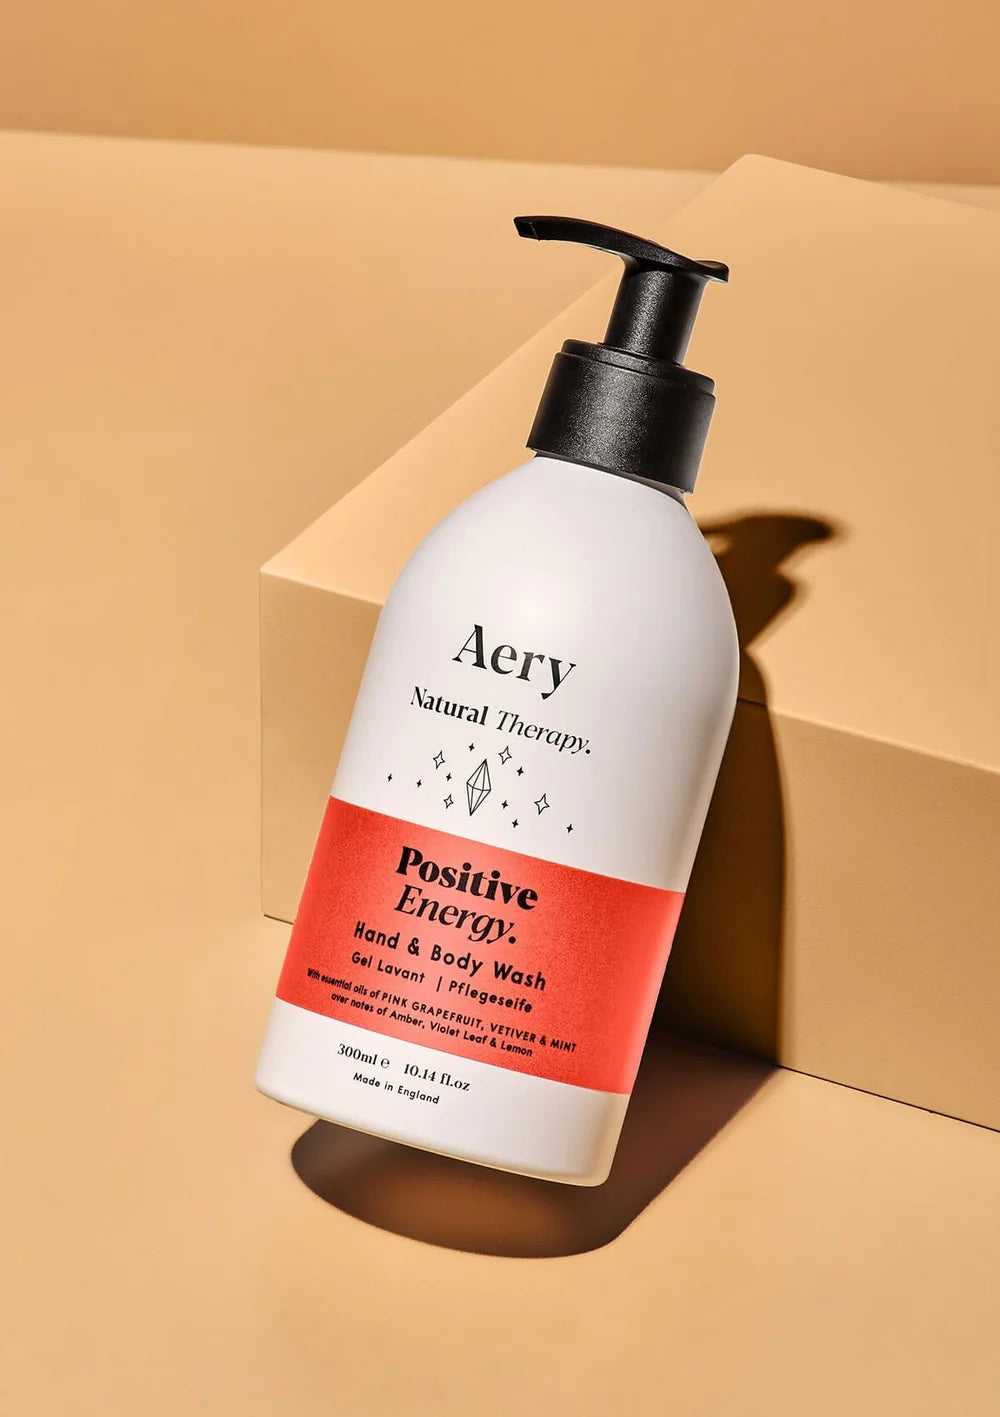 Aery Positive Energy Hand & Body Wash 300ml - Pink Grapefruit Mint and Vetiver